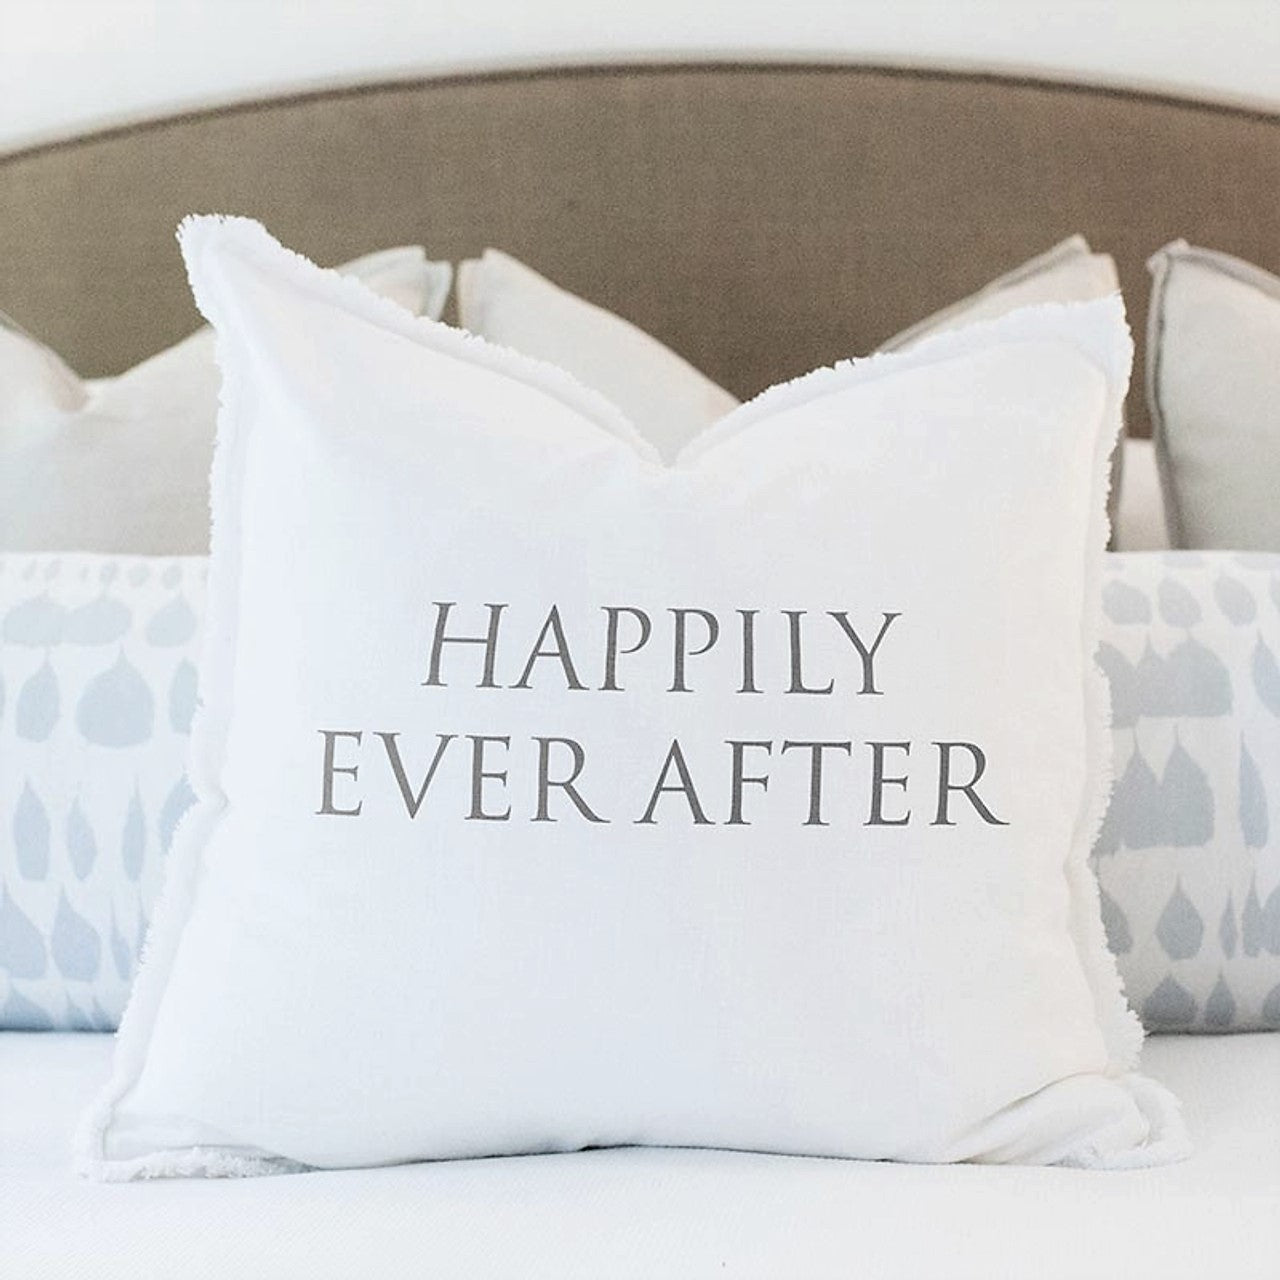 Happily Ever After Pillow, 26 x 26